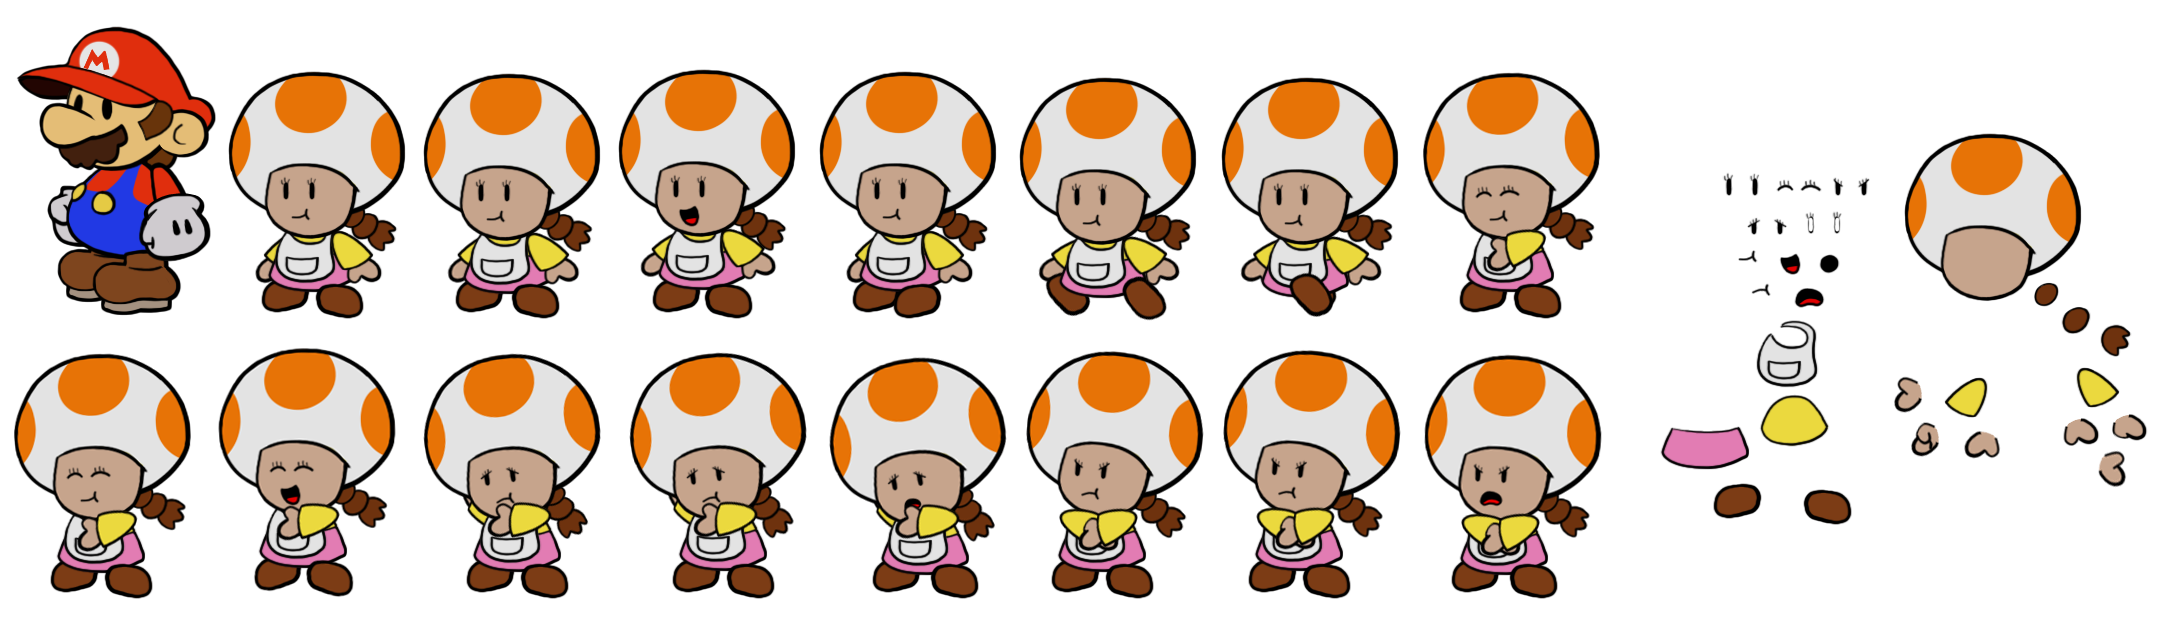 Innkeeper Toadette (Paper Mario-Style)